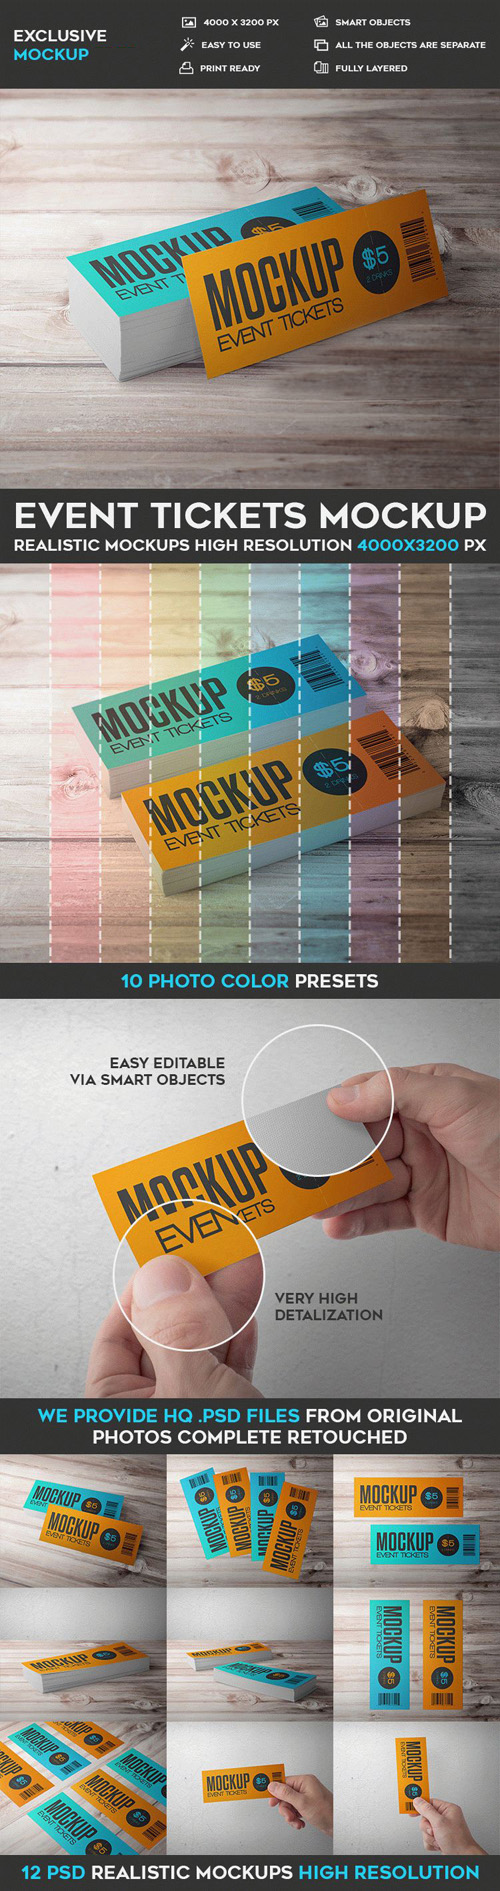 Event Tickets - 12 PSD Mockups